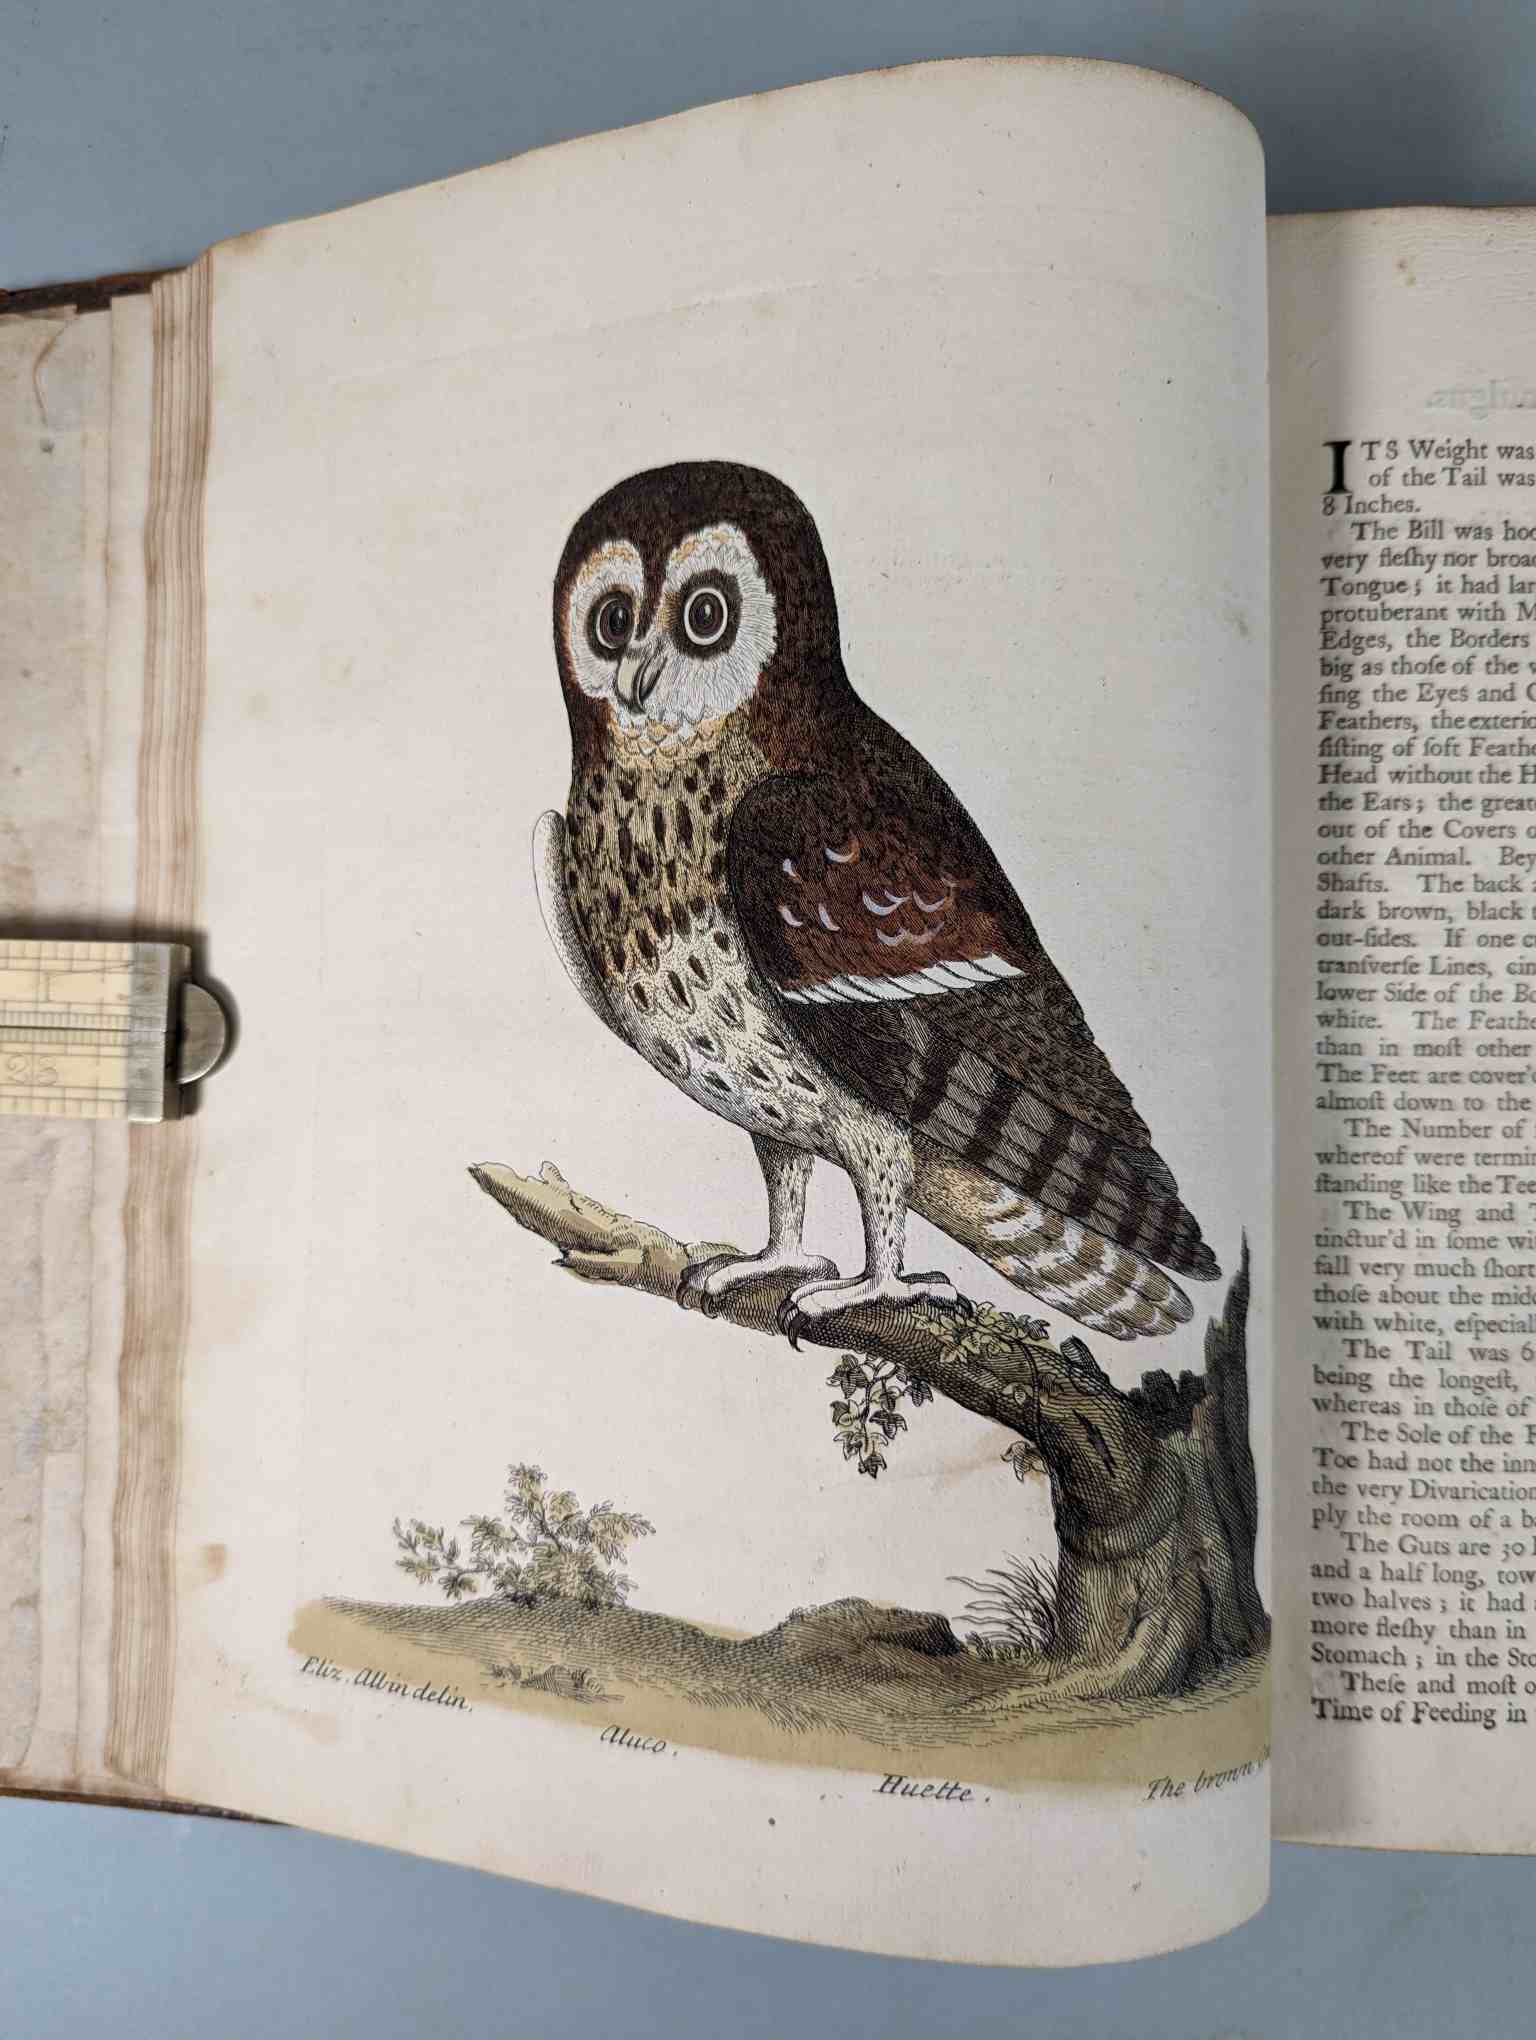 ALBIN, Eleazar. A Natural History of Birds, to which are added, Notes and Observations by W. - Image 12 of 208